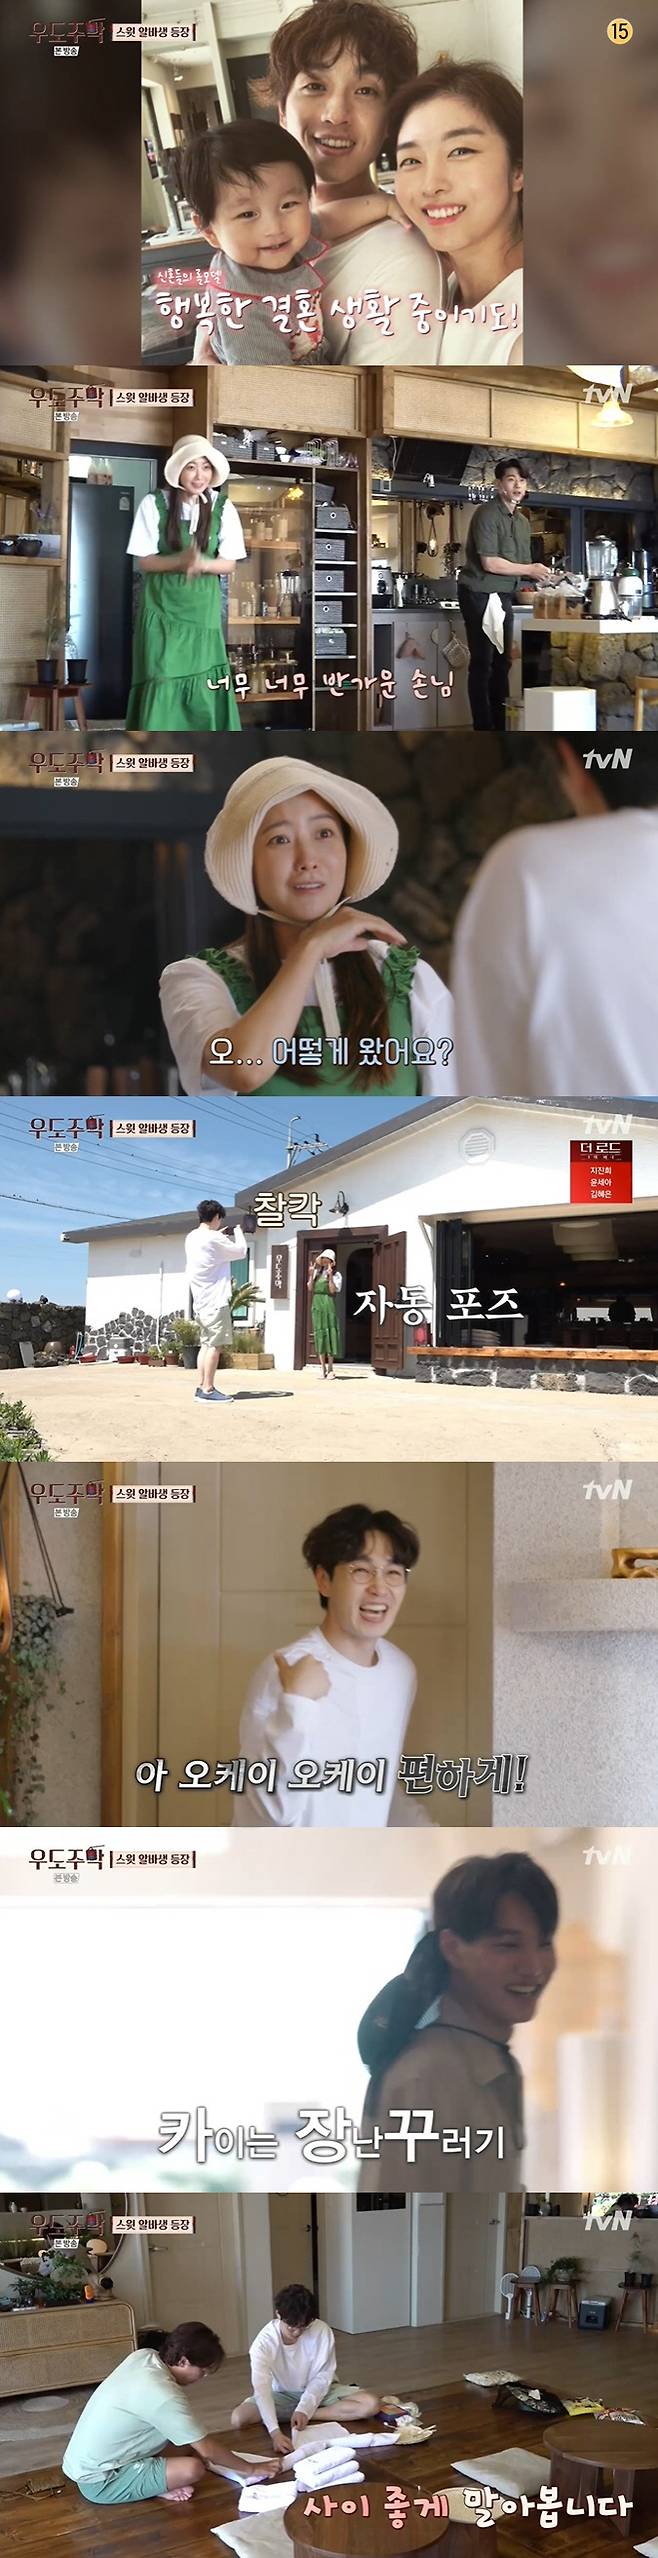 Kim Hee-sun showed off his signature candid dedication - also Tak Jae-hun revealed his thoughts on retirement.On the 9th TVN Udo Jumak, Kim Hee-sun, Tak Jae-hun, Teo Yooooo, Mun Se-yun and Kai were shown preparing new menus and special courses for Newlyweds.SG Wannabe Lee Seok Hoon also appeared as a second part-time job and turned into a house singer for Newlyweds only.Tak Jae-hun, Mun Se-yun and Kai left Udo in-depth to inform Newlyweds of various Udos.While the three people were wandering around the beach and looking for restaurants and entertainment, a new part-time student Lee Seok Hoon arrived at the main Baro.Kim Hee-sun and Teo Yooooo initially mistook Lee Seok Hoon, who wore a mask, for a guest, but was soon emBarorassed to see her mask naked.Kim Hee-sun was pleased to say, How did you get here because you are so busy these days? and Lee Seok Hoon said, No, just write me comfortably.Kim Hee-sun said, I will stop it if I get a little closer. Teo Yooooo also said, I will errand it from 3:00 in 30 minutes.While Lee Seok Hoon was organizing his luggage, Kim Hee-sun contacted the members who left the survey and informed him that the new part-time student was Lee Seok Hoon.Kim Hee-sun didnt show off in front of Lee Seok Hoon, but he came into the room and showed up like a girl fan, hopping.Until the other members arrived, Lee Seok Hoon watched the main curtain with Kim Hee-sun.Lee Seok Hoon showed off his affectionate side of taking a Baro photo at Kim Hee-suns words that he did not get much pictures.Lee Seok Hoon, who discovered outdoor Foa, wondered if guests were drinking heavily.However, Kim Hee-sun, who mistakenly thought of it, said that he was asking his liquor and said Baro about three bottles of shochu?After that, Tak Jae-hun, Mun Se-yun and Kai arrived and greeted Lee Seok Hoon with a welcome greeting.In particular, Kai said, The grand prix, and greeted Lee Seok Hoon with a good greeting.However, he soon turned around and laughed, saying, I am a senior in the music industry, but I am not a junior in the main Baro.Lee Seok Hoon folded the towel with Tak Jae-hun for his first part-time job and prepared a room setting.Kim Hee-sun and Kai made a new snack.However, Lee Seok Hoon, who tasted the unexpected no-flavor snack, laughed coolly, saying, I eat it if I have it, but I do not think I will buy it.Tak Jae-hun and Mun Se-yun, who wanted to hear Lee Seok Hoons song on the day, set up an operation, and Tak Jae-hun first led the song.The two then handed out the microphone as soon as Lee Seok Hoon came out of the bathroom, and Lee Seok Hoons song naturally began.Then Newlyweds guests arrived, and Lee Seok Hoon was stunned to sing La Lara with a welcome song.The arriving guests naturally called together with the Taechang, and a warm atmosphere was created from the beginning.Kim Hee-sun prepared a bride tour while guests packed their bags in the room, planning a Udo drive and peanut ice cream restaurant tour with only their wives.Kim Hee-sun, who was in the guide himself, said, I am the first to go on a tour with my wife like this.Kim Hee-sun talked with his wives and said, I do not know the hearts of those who meet long because of the short period of love.I married at the age of 30 and gave birth to a child at the age of 31, he said. If a couple drinks well, they get a child strangely quickly.At the same time, eight men enjoyed free time talking in the main curtain. Lee Seok Hoons love story was also briefly released.Lee Seok Hoon revealed: We first reported marriage in 2014 and wed in 2016; we married at 31.Lee Seok Hoon, who met his wife 10 years ago in a love program and married her, said, I married very early for a ballad singer.My son is four years old this year, too, he said, enviing.During the story, a male guest said that he was preparing for the proposal, and Mun Se-yun actively said, We should help.When the members were more excited and planned, the guest was emBarorassed, and Neo Yo laughed, I made a plan, but it collapsed and I was sweating alone.Lee Seok Hoon advised, We can do what we really want to do even if we do this. The guest said, I would like to ask you to come and celebrate with your time because it is time to eat dinner and darken.Kai, who was listening to the guest, recommended the place he had visited in the morning as a proposal place, and the two went on a preliminary visit before the female guests returned from the bride tour.The male guest looked at the place Kai recommended and said, Its just what I wanted. Im confident. Its perfect. Its just as I imagined.Kai, who was happy, promised after-sales service, saying, I will take a picture if I follow the car in the back and it is over.The Newlyweds, who gathered back at the mainstay, enjoyed the dinner menu prepared by Teo Yoooooo.Teo Yoooooo made carrot pumpkin soup, gulash and pasta, and German scrambled pancakes, and Lee Seok Hoon admired it as my brother is sincere in cooking.Teo Yooooo quickly prepared the meal so that the customers plan to prepare the proposal did not fail, and the other members also helped the two make time by driving the atmosphere.Thanks to the help of the members, the male guest returned from the proposal safely at the place he wanted and delighted everyone.A surprise concert was held at the outdoor Foa on the day.Newlyweds enjoyed a romantic night, with the interlude dance of Tak Jae-hun, Kais growl dance, and Lee Seok Hoons sweet song in two years.Meanwhile, Tak Jae-hun, who had a late dinner with the members after taking all the guests, brought up Kim Hee-suns prime story: Hee Seon was great when he was a child.Hong Kong actors were not playing the game, too. Jackie Chan was doing it with Hee Sun. Kai also said that it was 10 years since he had already debuted, saying, We have a lot of idol life of 5 ~ 7 years and we have not been able to go for 10 years.I thought retirement was Twenty-nine when I was 20, Lee Seok Hoon said. I can do that then.But when you turn into Twenty Eight, you think it will be the same as thirty-eight? Kai replied, I want to think about what I was thinking. Tak Jae-hun also said, Im surprised Im still shooting at this age, and Mun Se-yun said, Its going to be tough, its going to be really hard when you get older.I am shocked that I am two years older than Shin Dong-yeop and Kang Ho-dong. Kai asked Tak Jae-hun, When were you going to retire? and Tak Jae-hun said, There is no retirement, naturally fade In-N-Out Burger.How do you catch the years, who will catch them? I think they have their lives. 